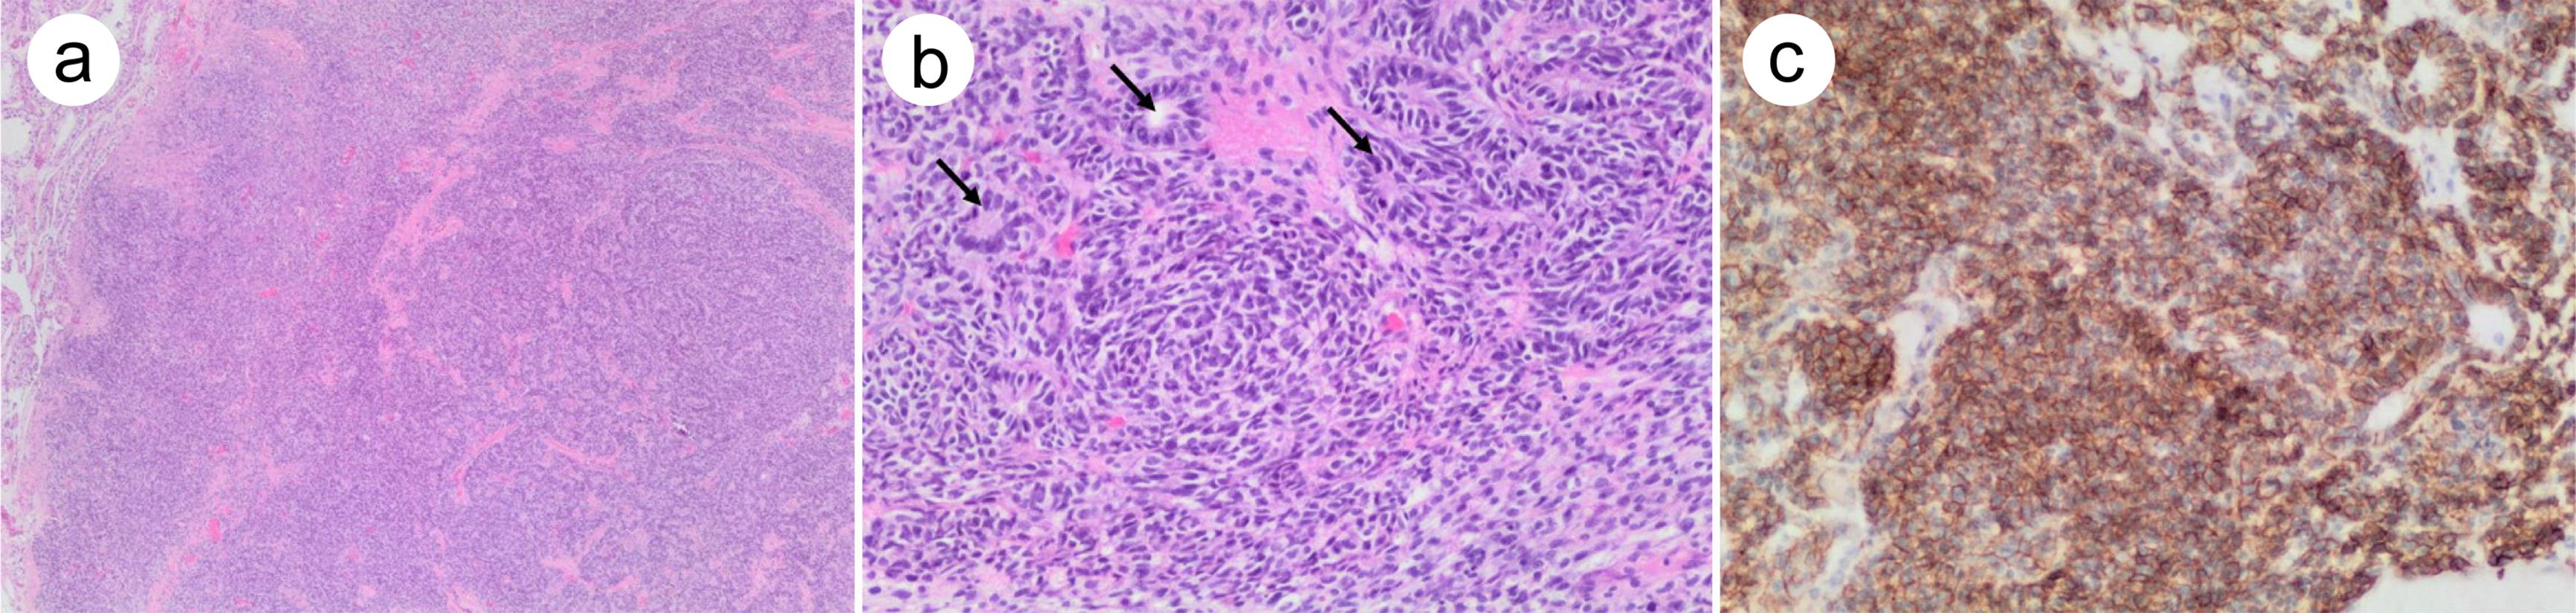 Embryonic-type neuroectodermal tumor arising from a testicular germ cell tumor.